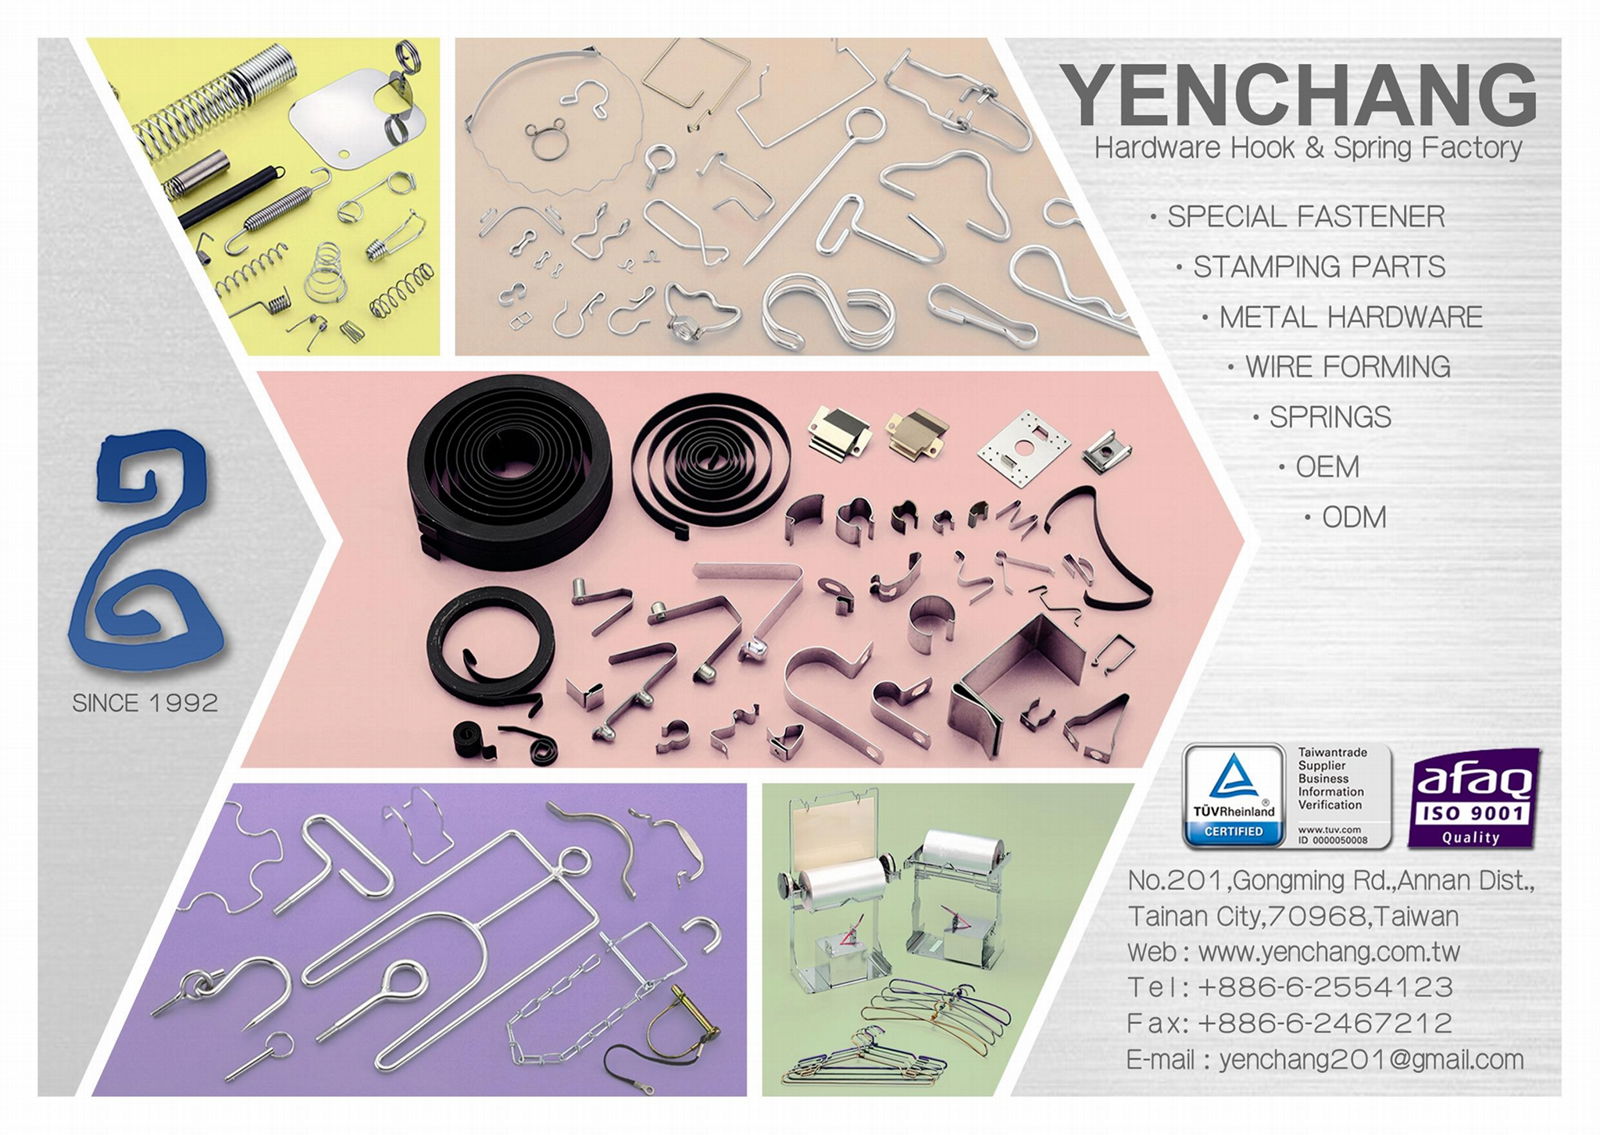 METAL STAMPING PARTS AND WIRE FORMINGS